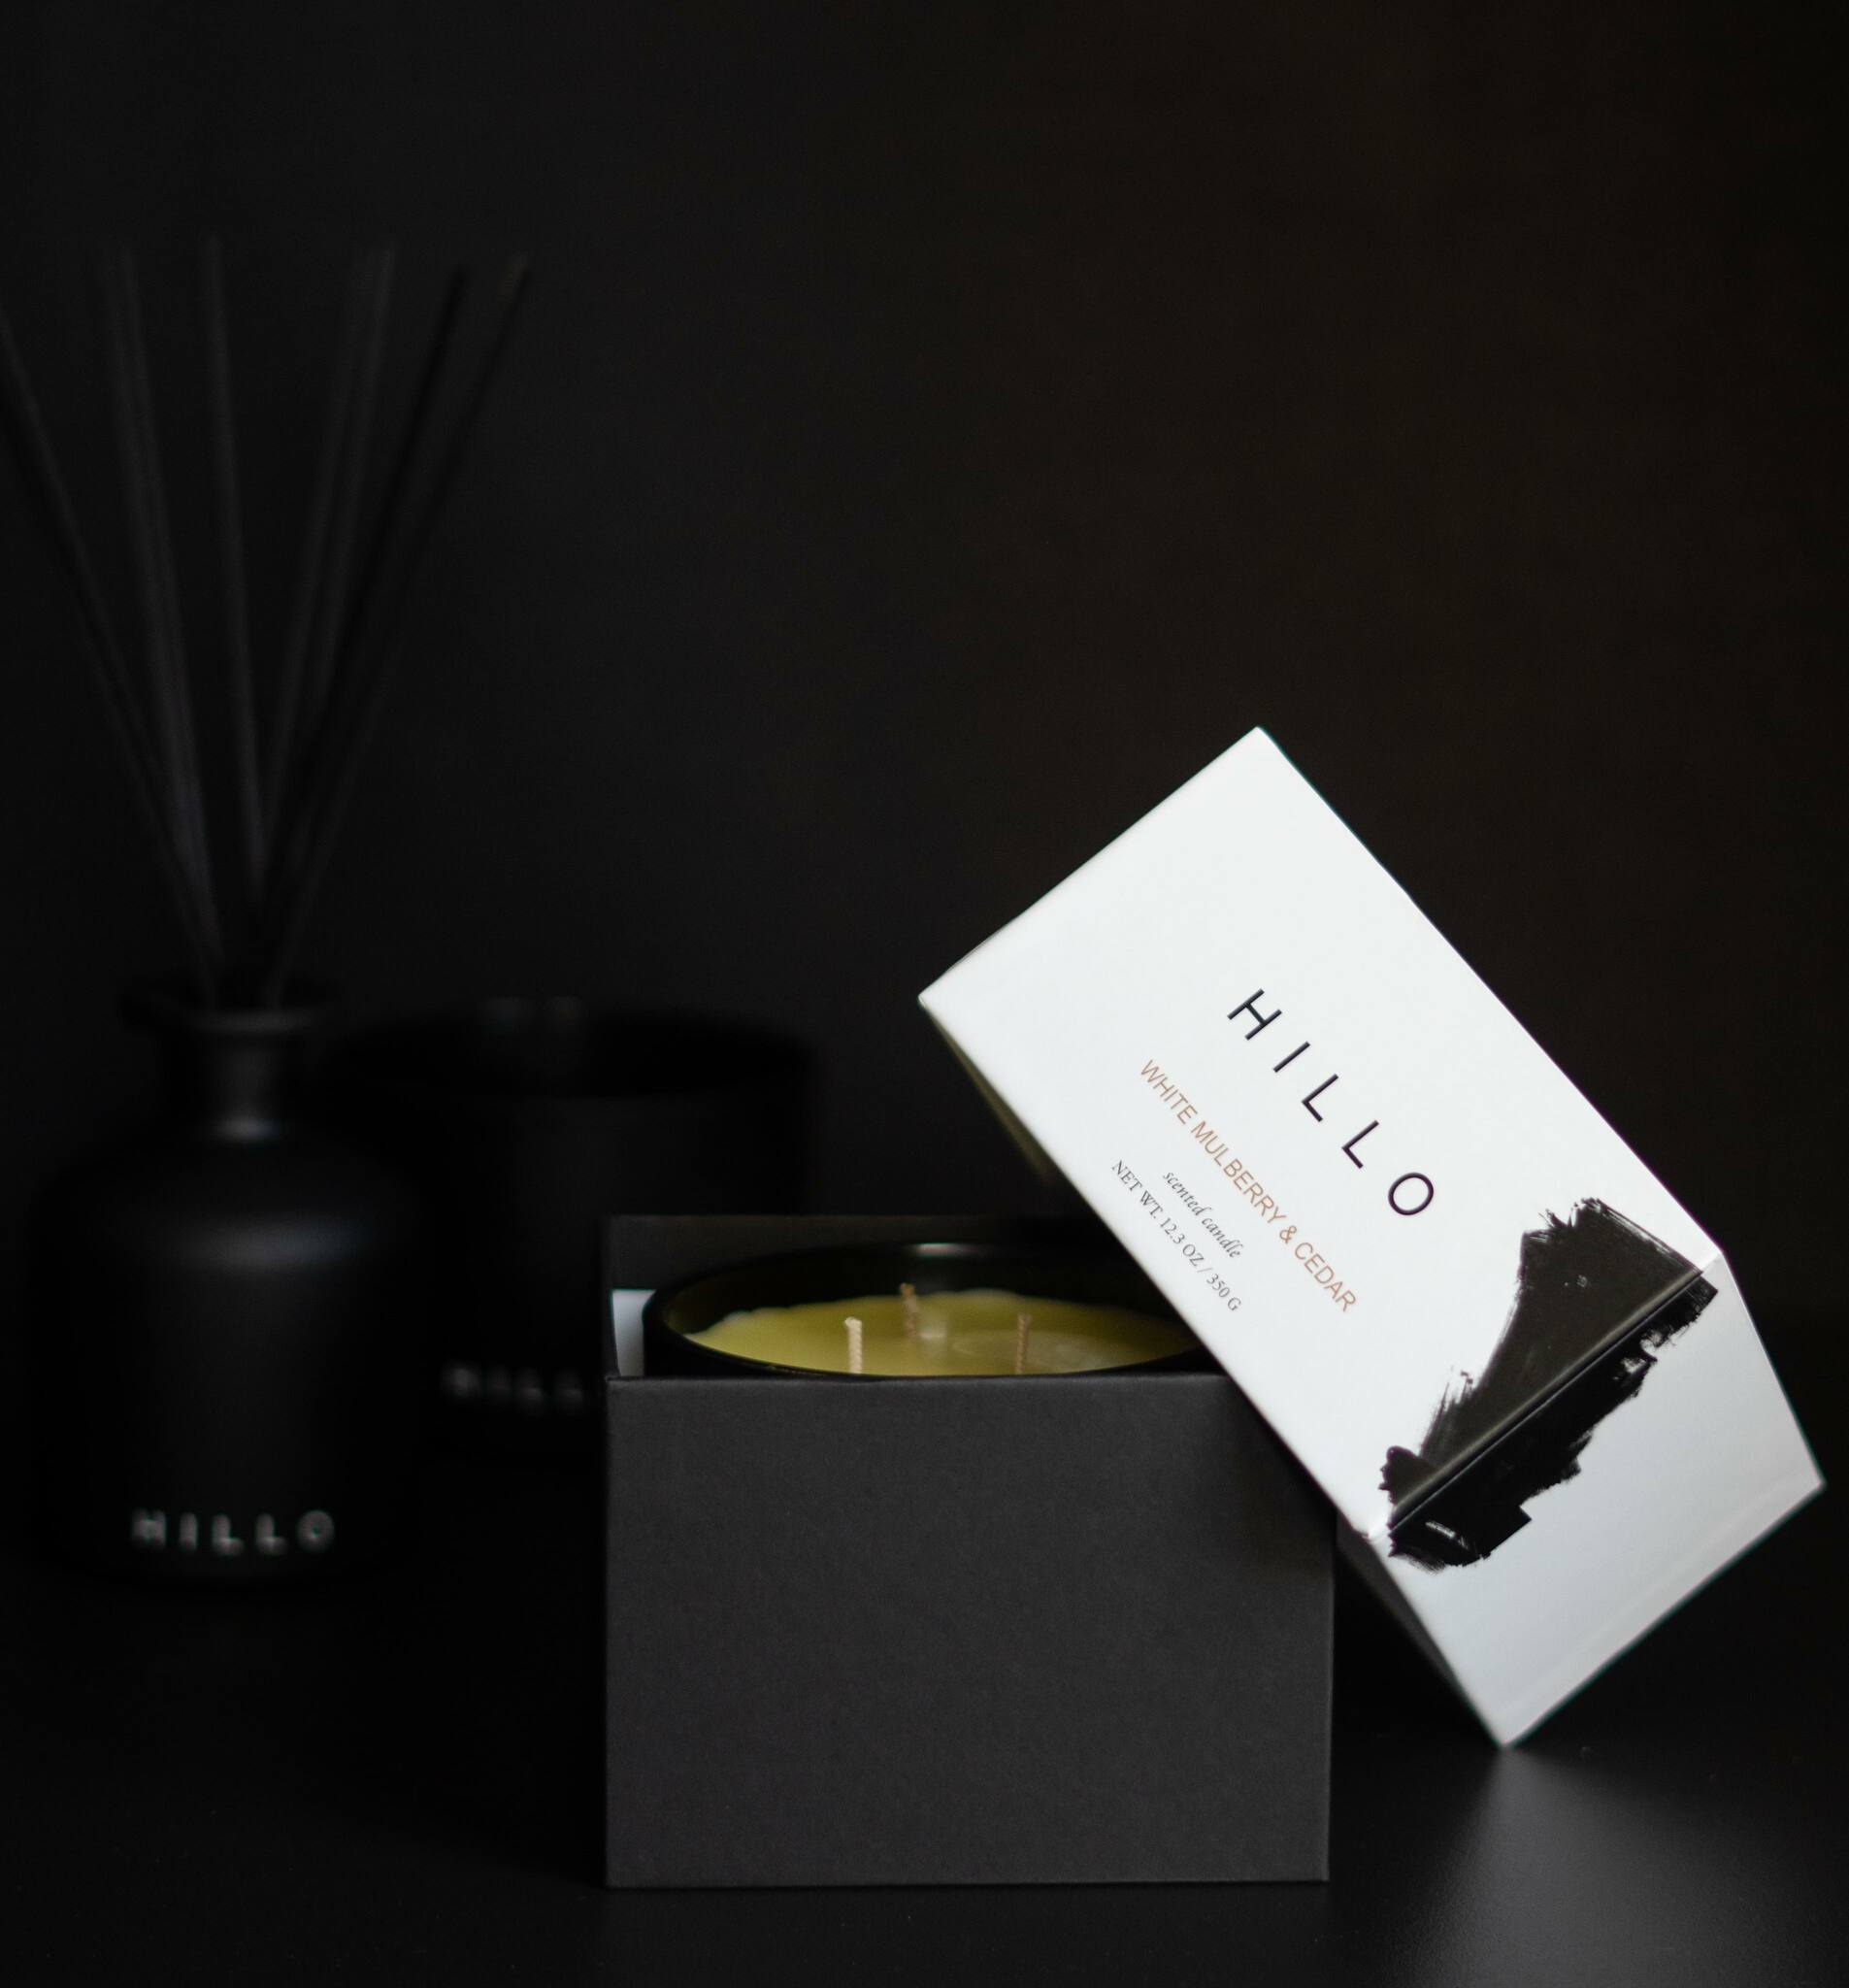 Hillo Scented Soy Candle - Mullberry & Cedar